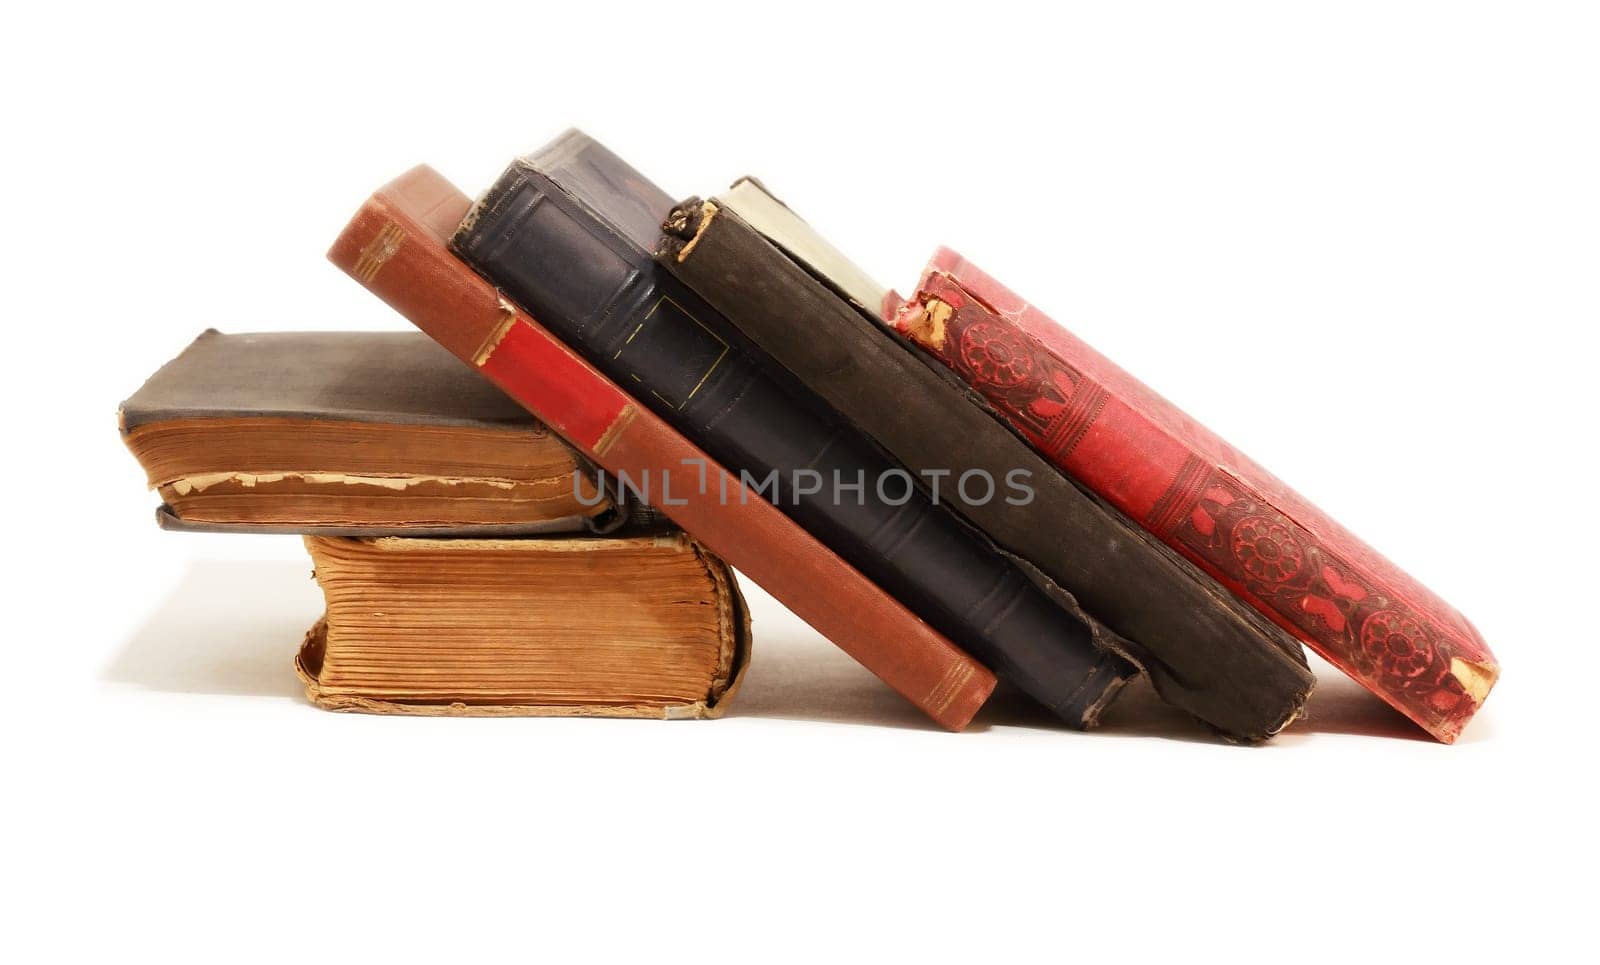 Set of various old books on white background